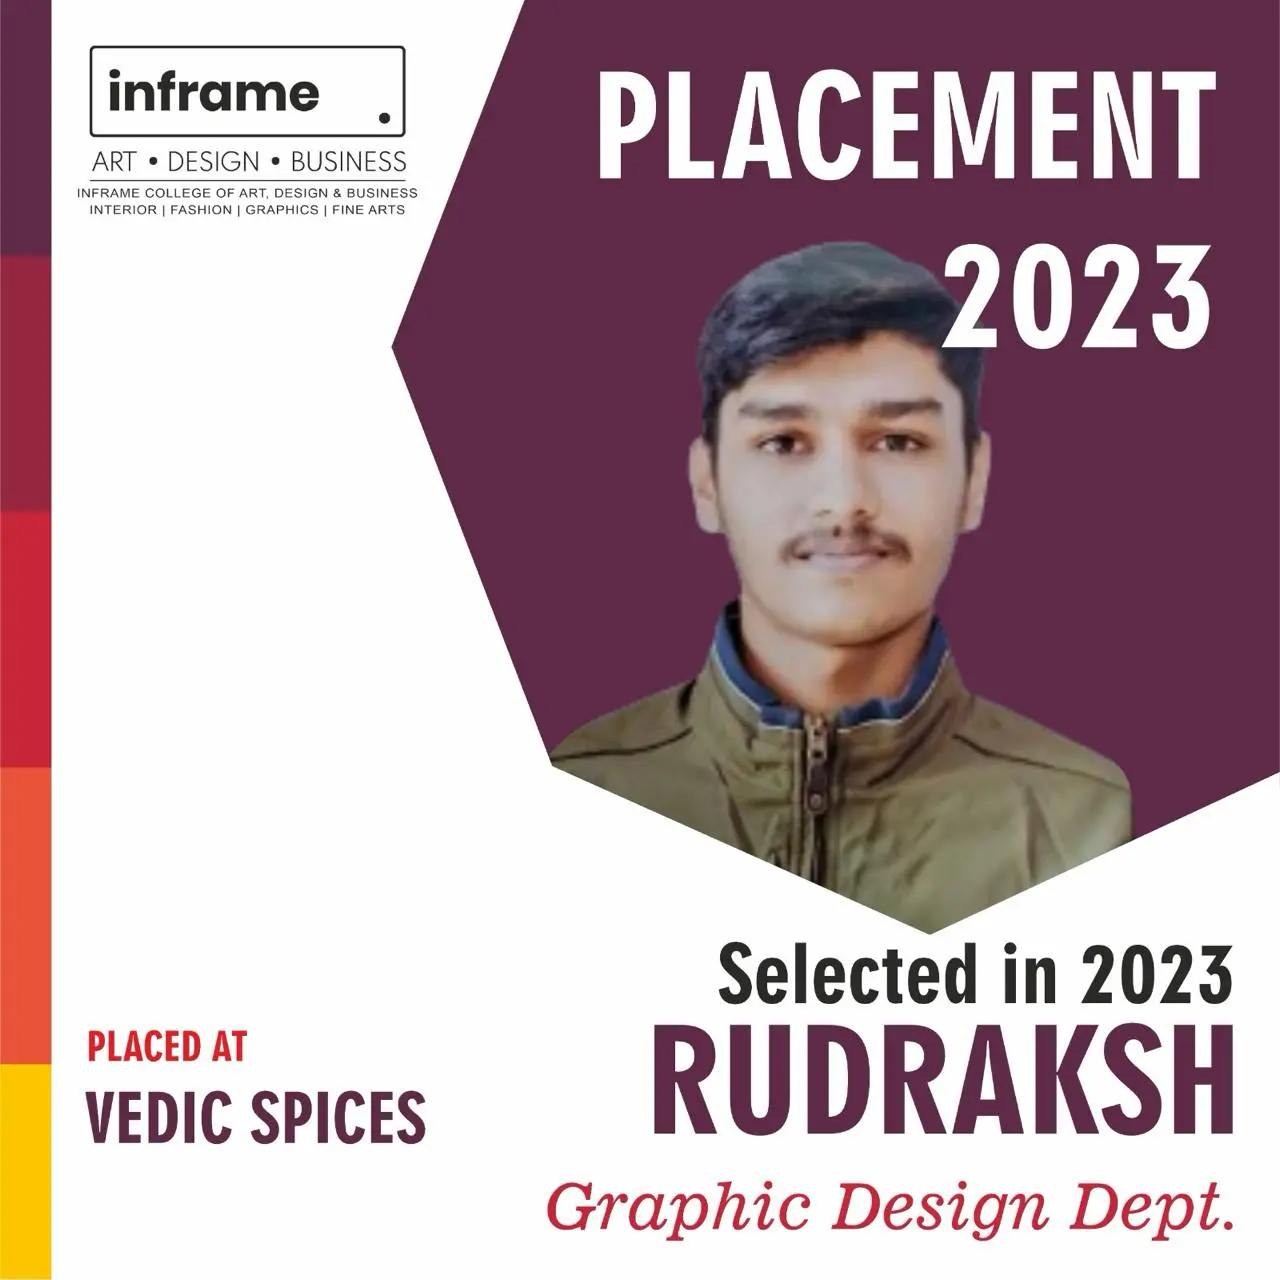 Inframe Student Placements